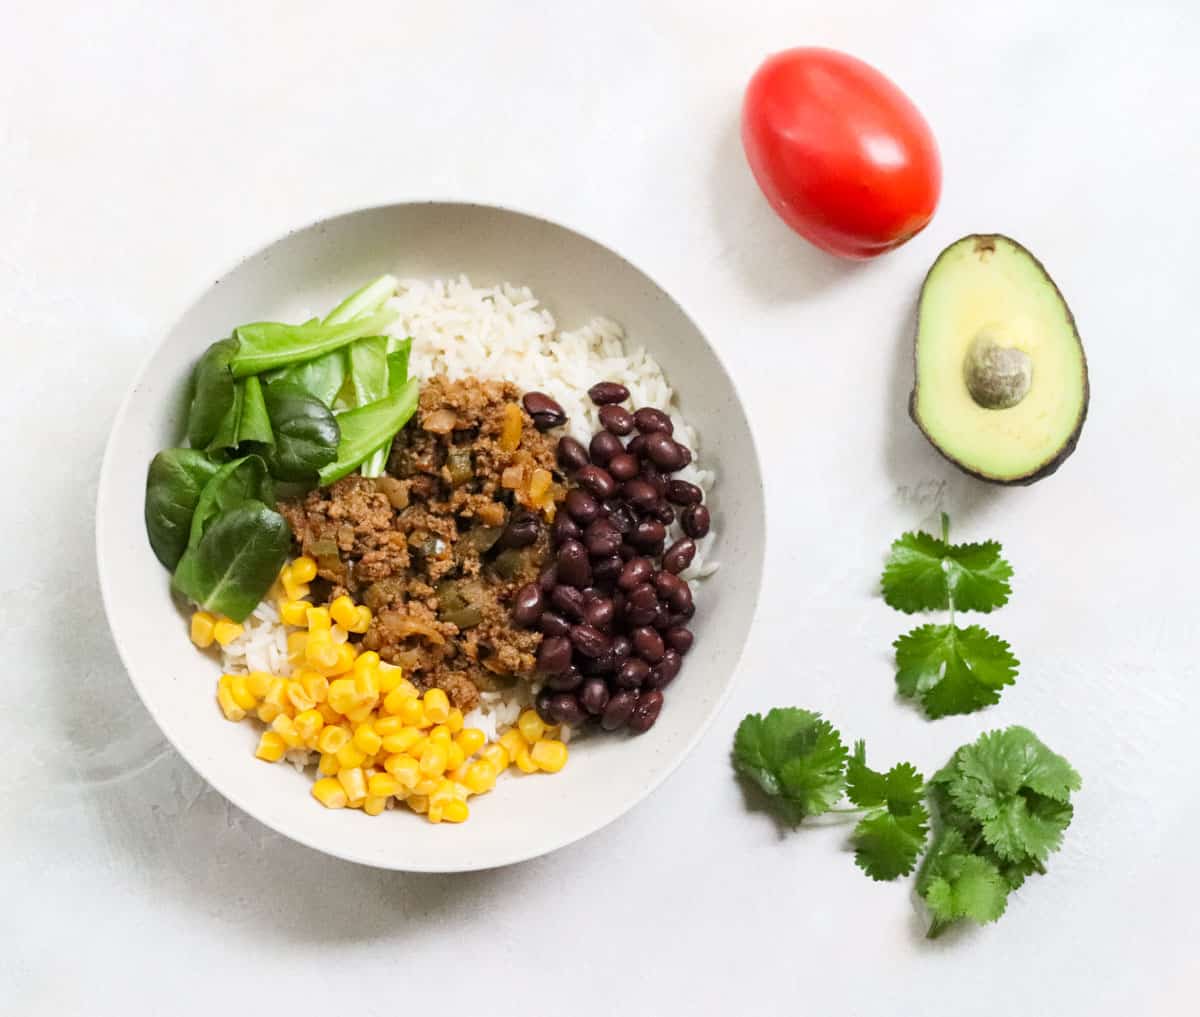 bowl with rice, black beans, taco meat, yellow corn, and lettuce next to a cut avocado, tomato, and fresh cilantro.